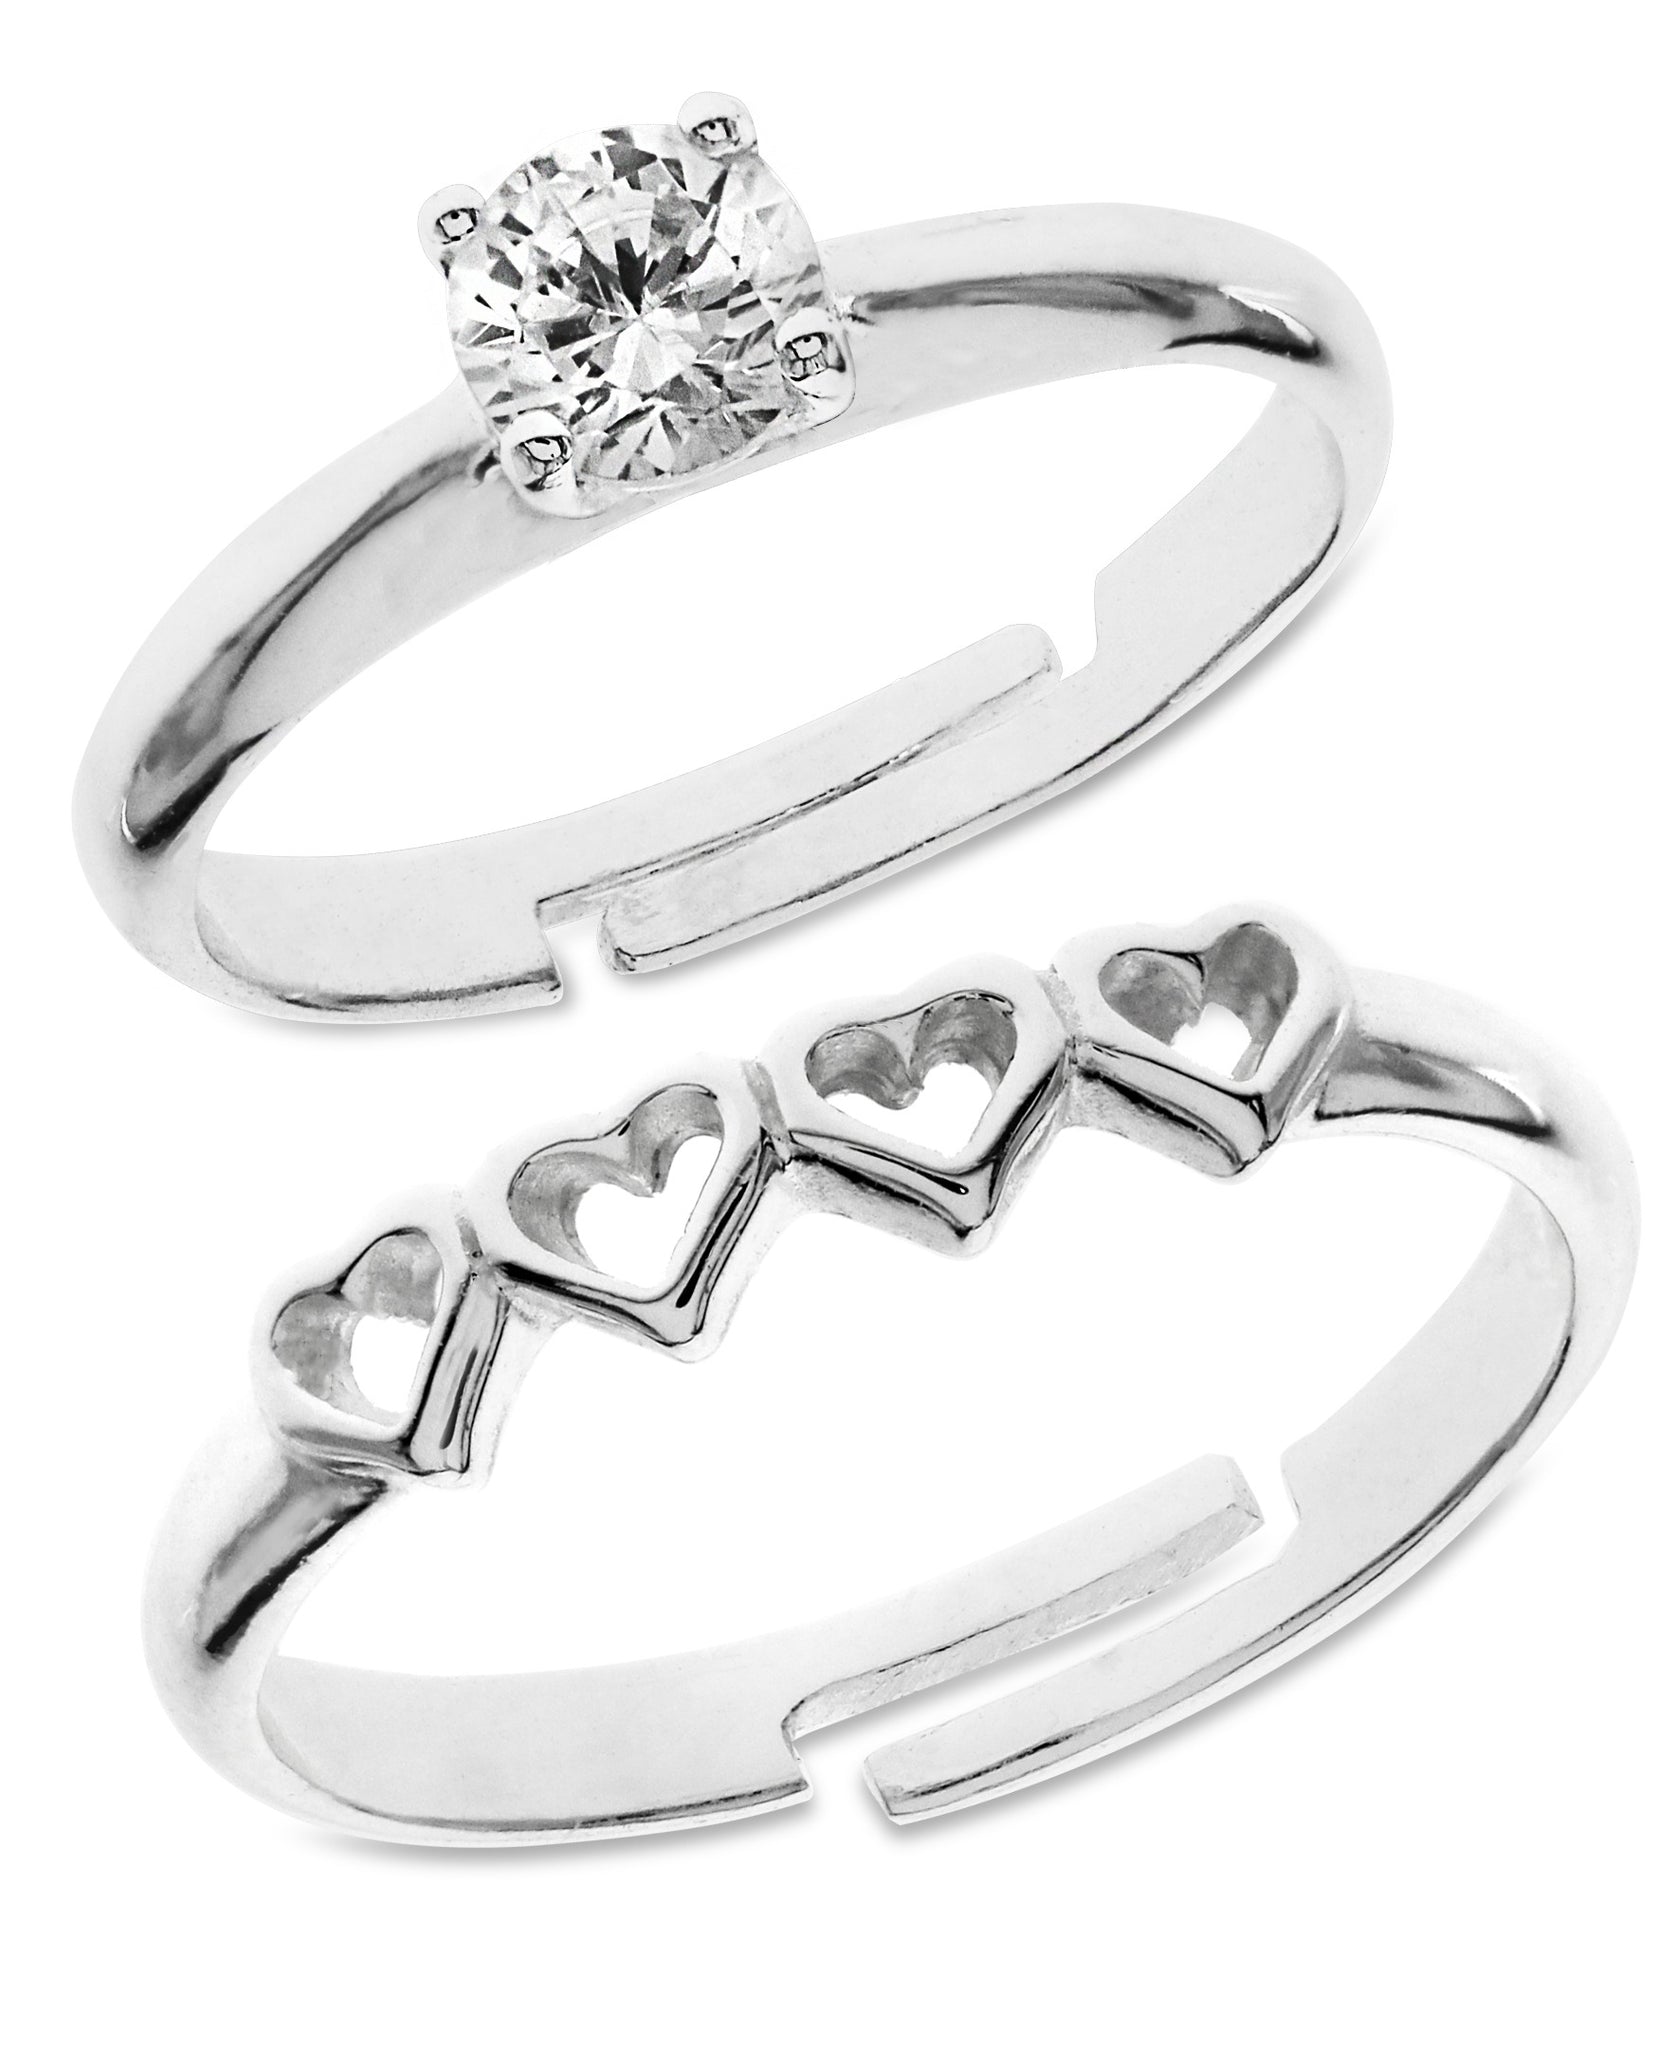 Children's Sterling Silver Hearts & Round Cut Cubic Zirconia Adjustable Rings - Set of 2 - Rhona Sutton Jewellery